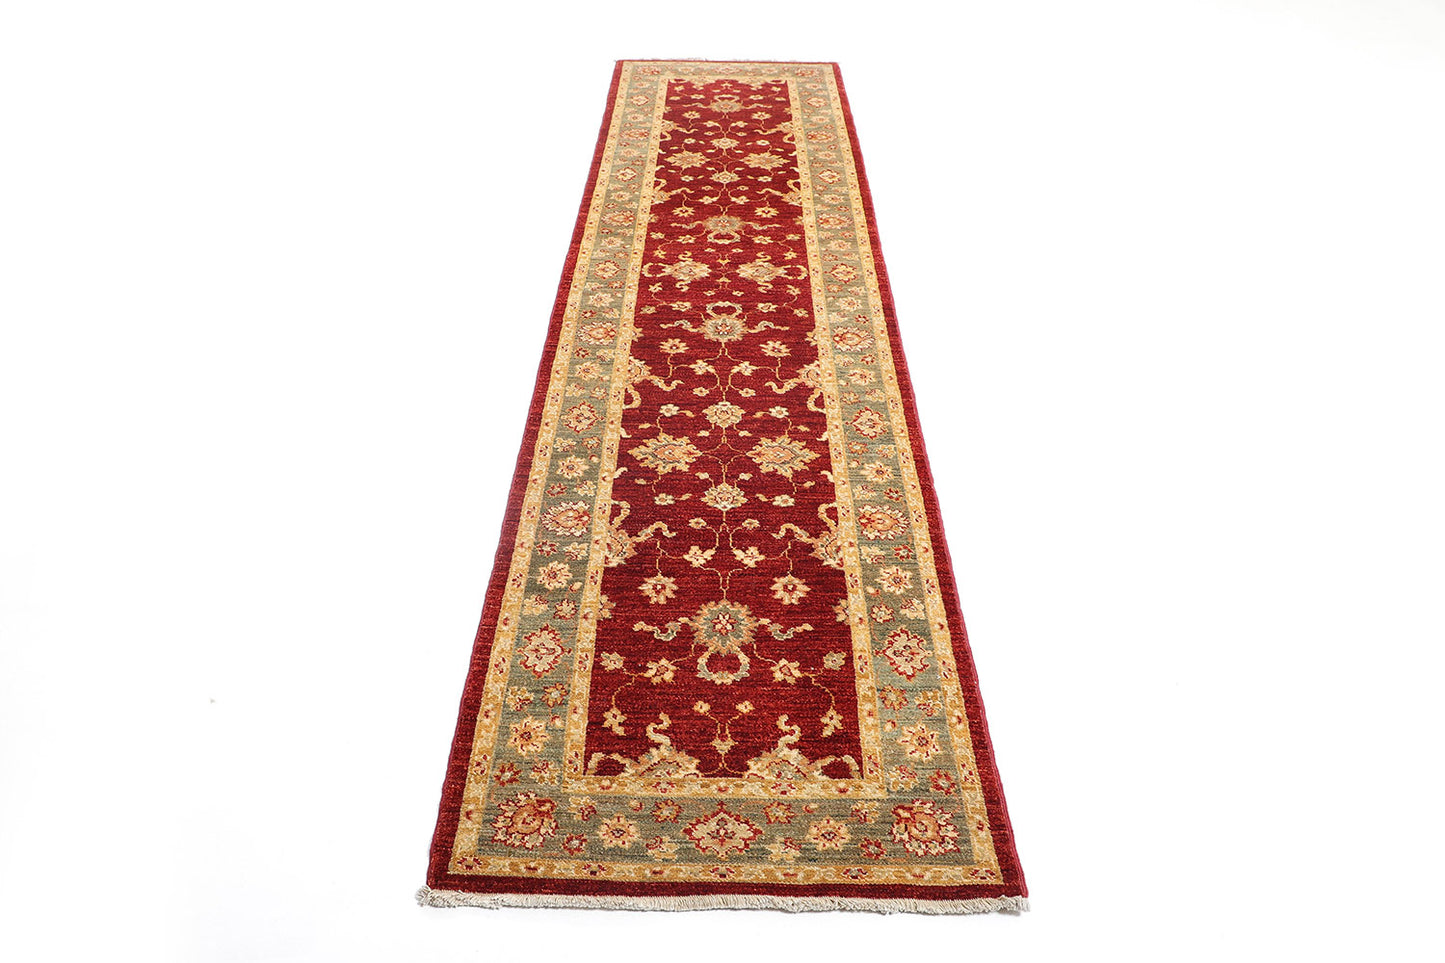 2.5x10 Hand-Knotted Ariana Carpet 2'.7" X 10'.5" Traditional, Red Fine Wool Runner Rug D40671